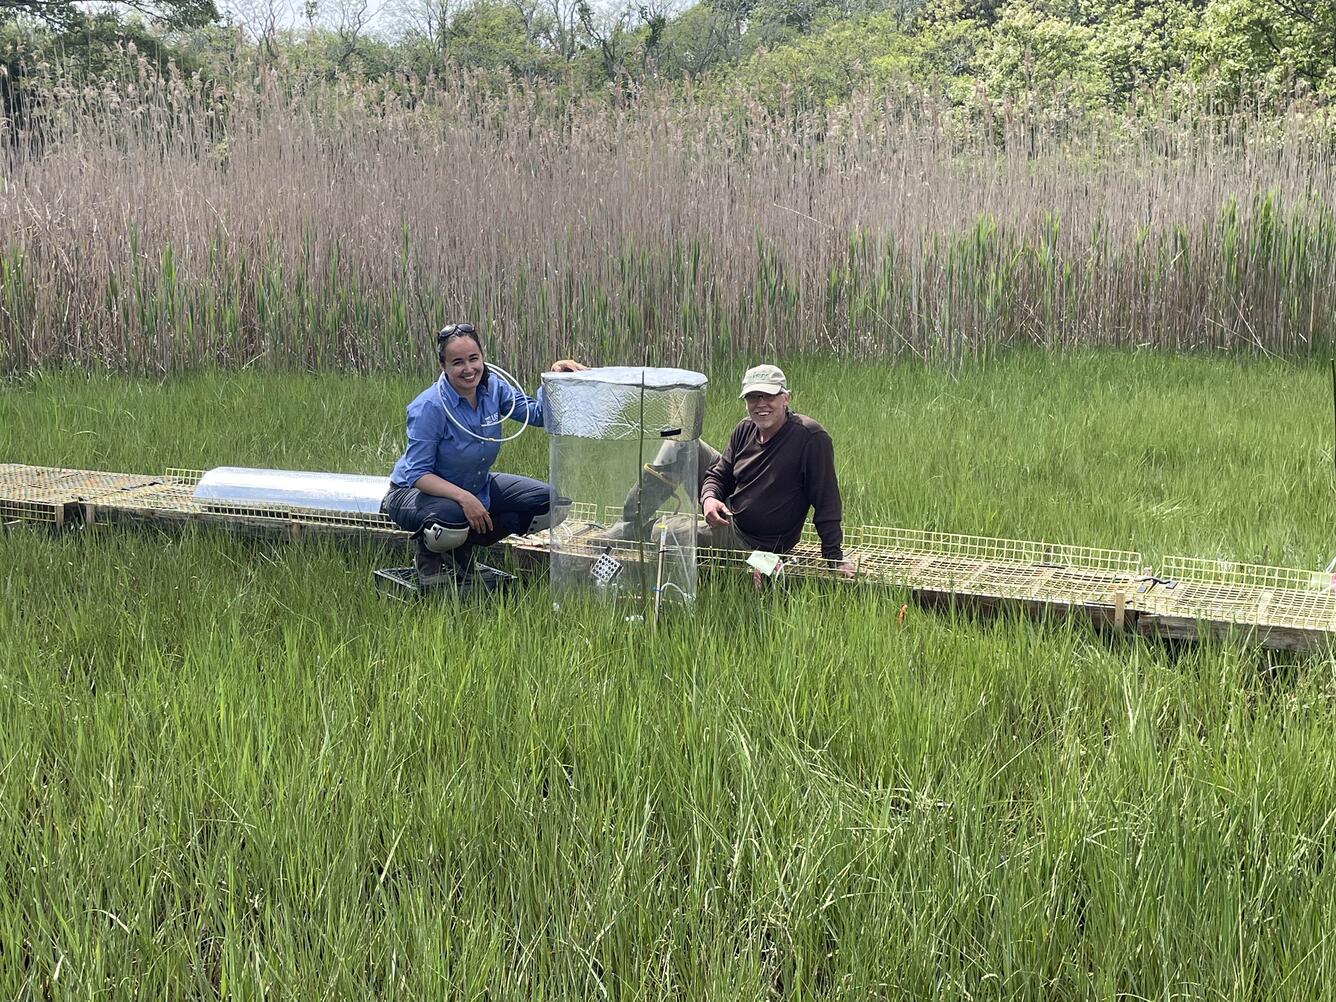 Two people in the middle of an estuary smiling at the camera while sitting on a ramp working with carbon flux equipment